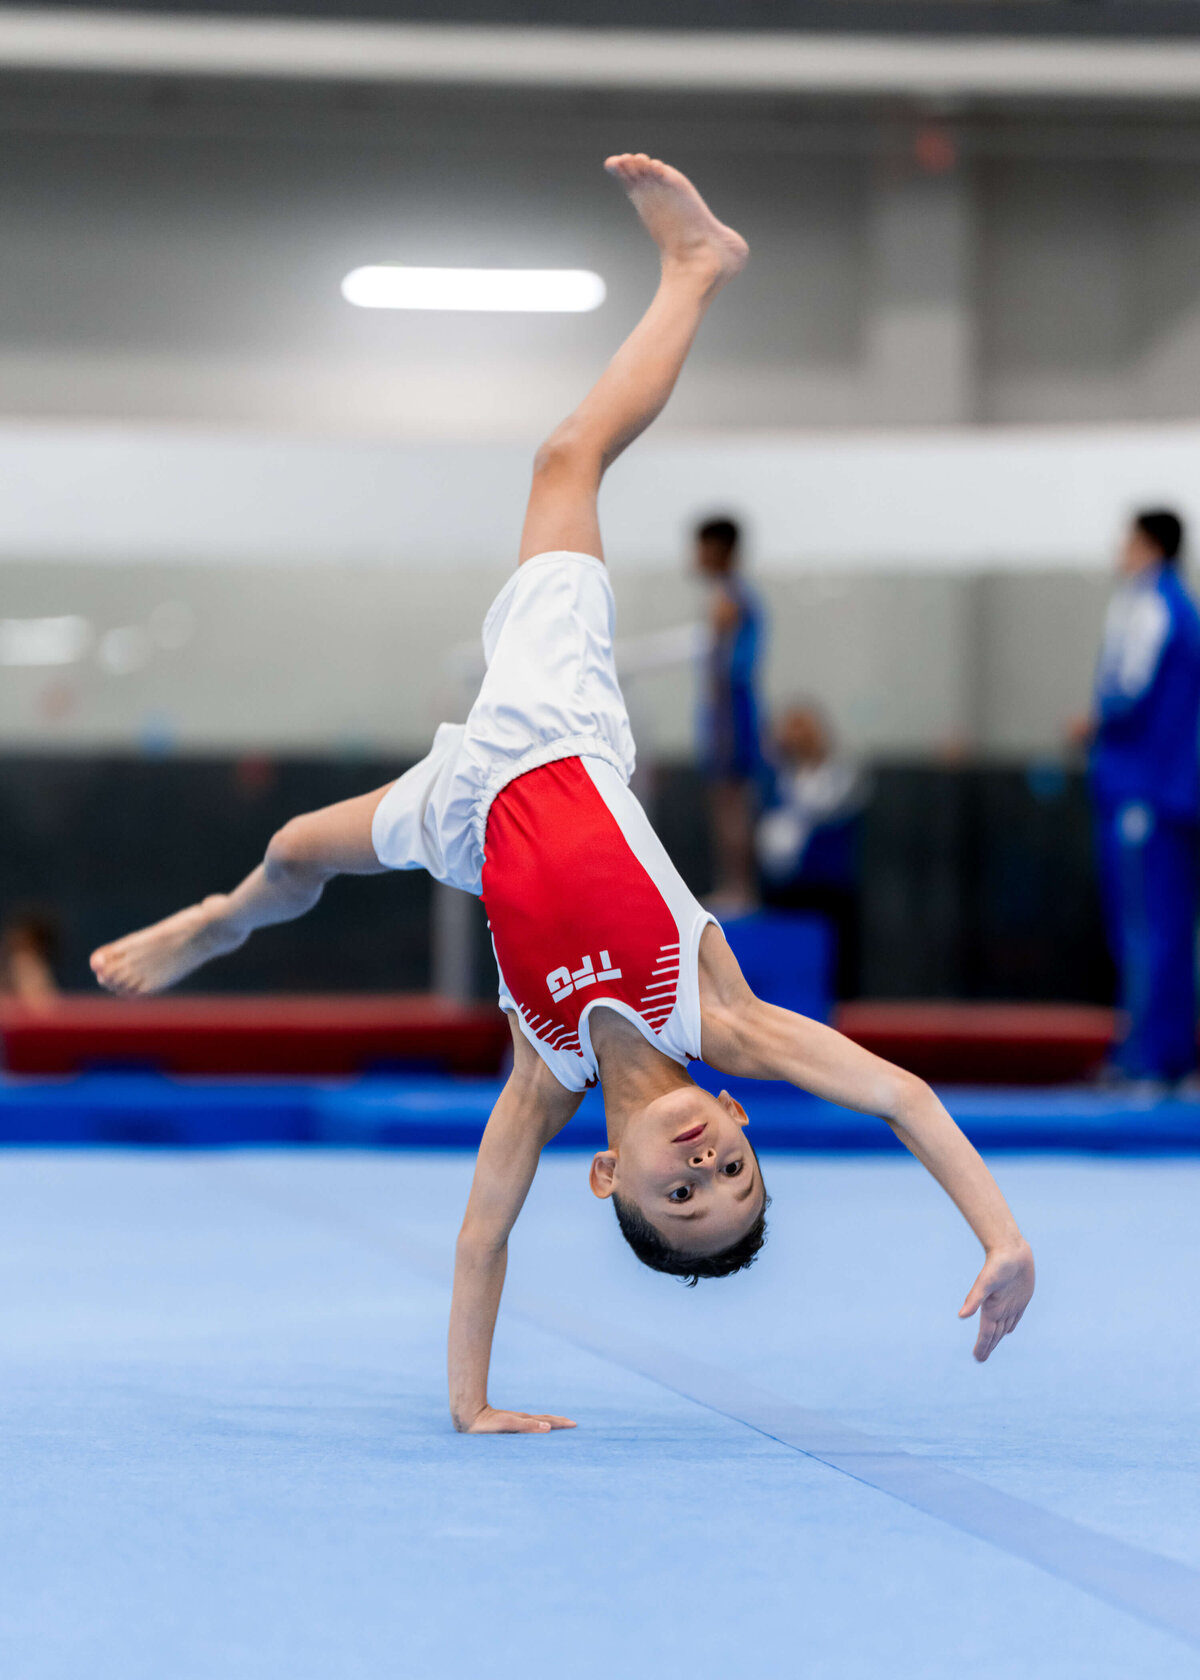 Photo by Luke O'Geil taken at the 2023 inaugural Grizzly Classic men's artistic gymnastics competitionA1_06910